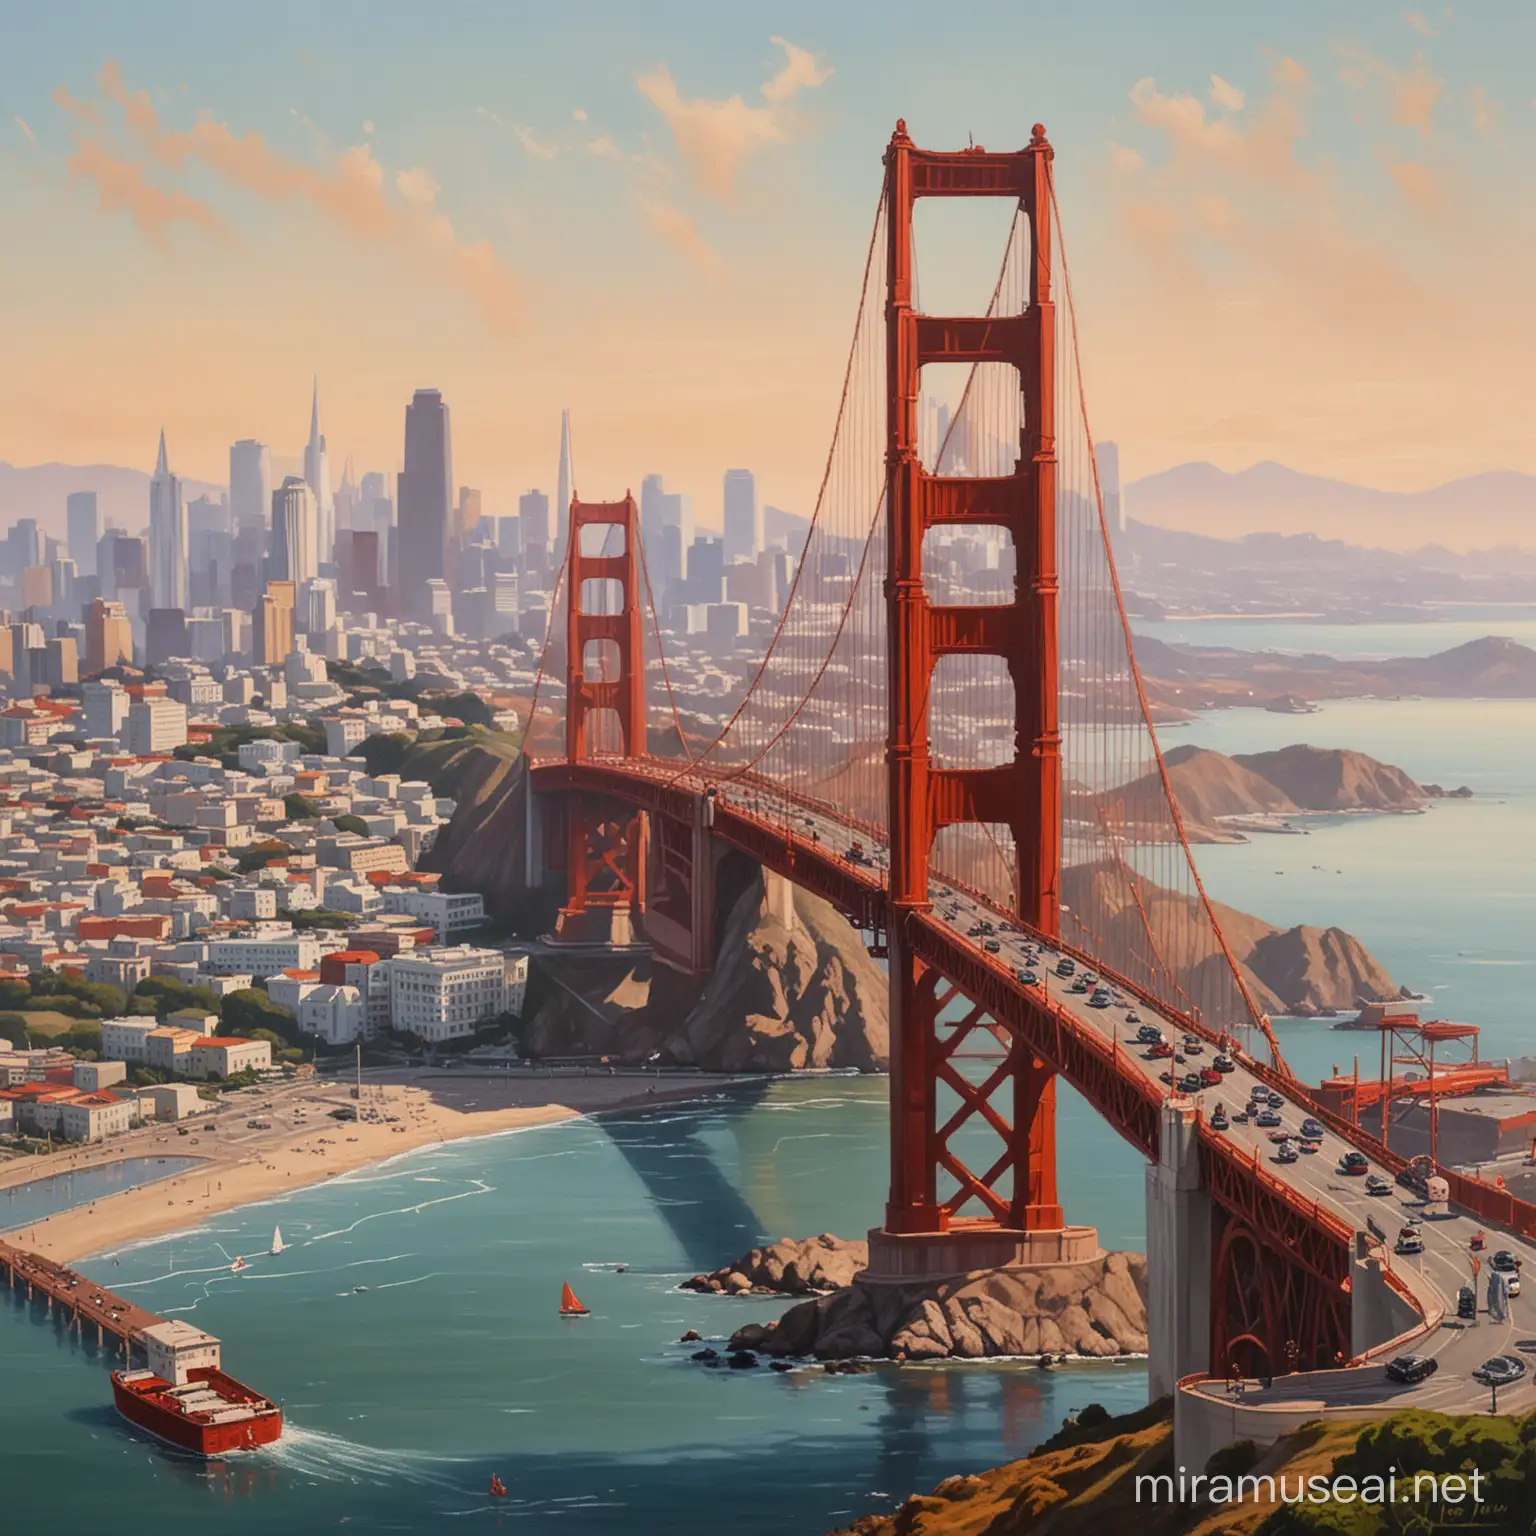 Urban Citylife and Iconic San Francisco Landmarks in Minimalistic Oil Painting Style